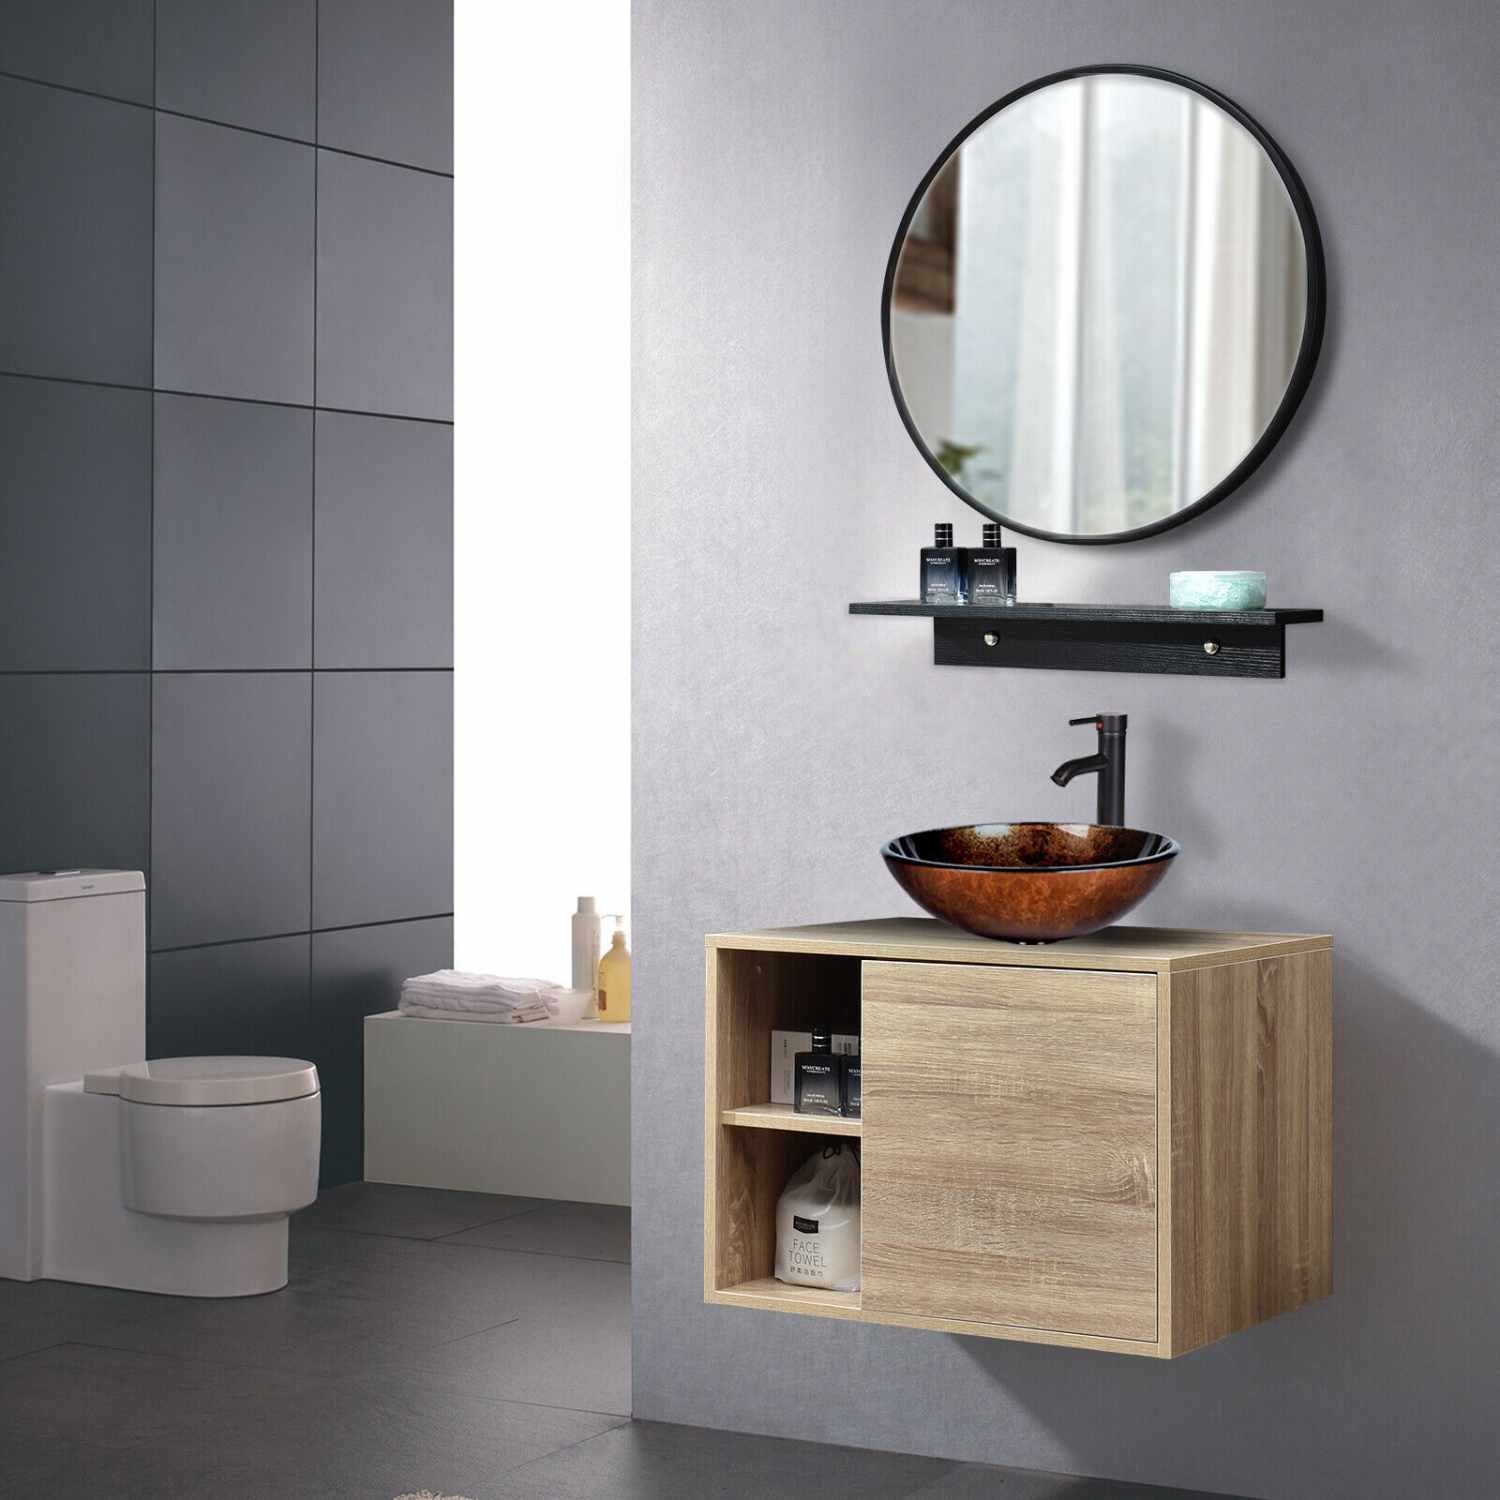 Elecwish natural Wall Mounted Cabinet with Round Brown Sink Combo US-BV1004 bathroom scene